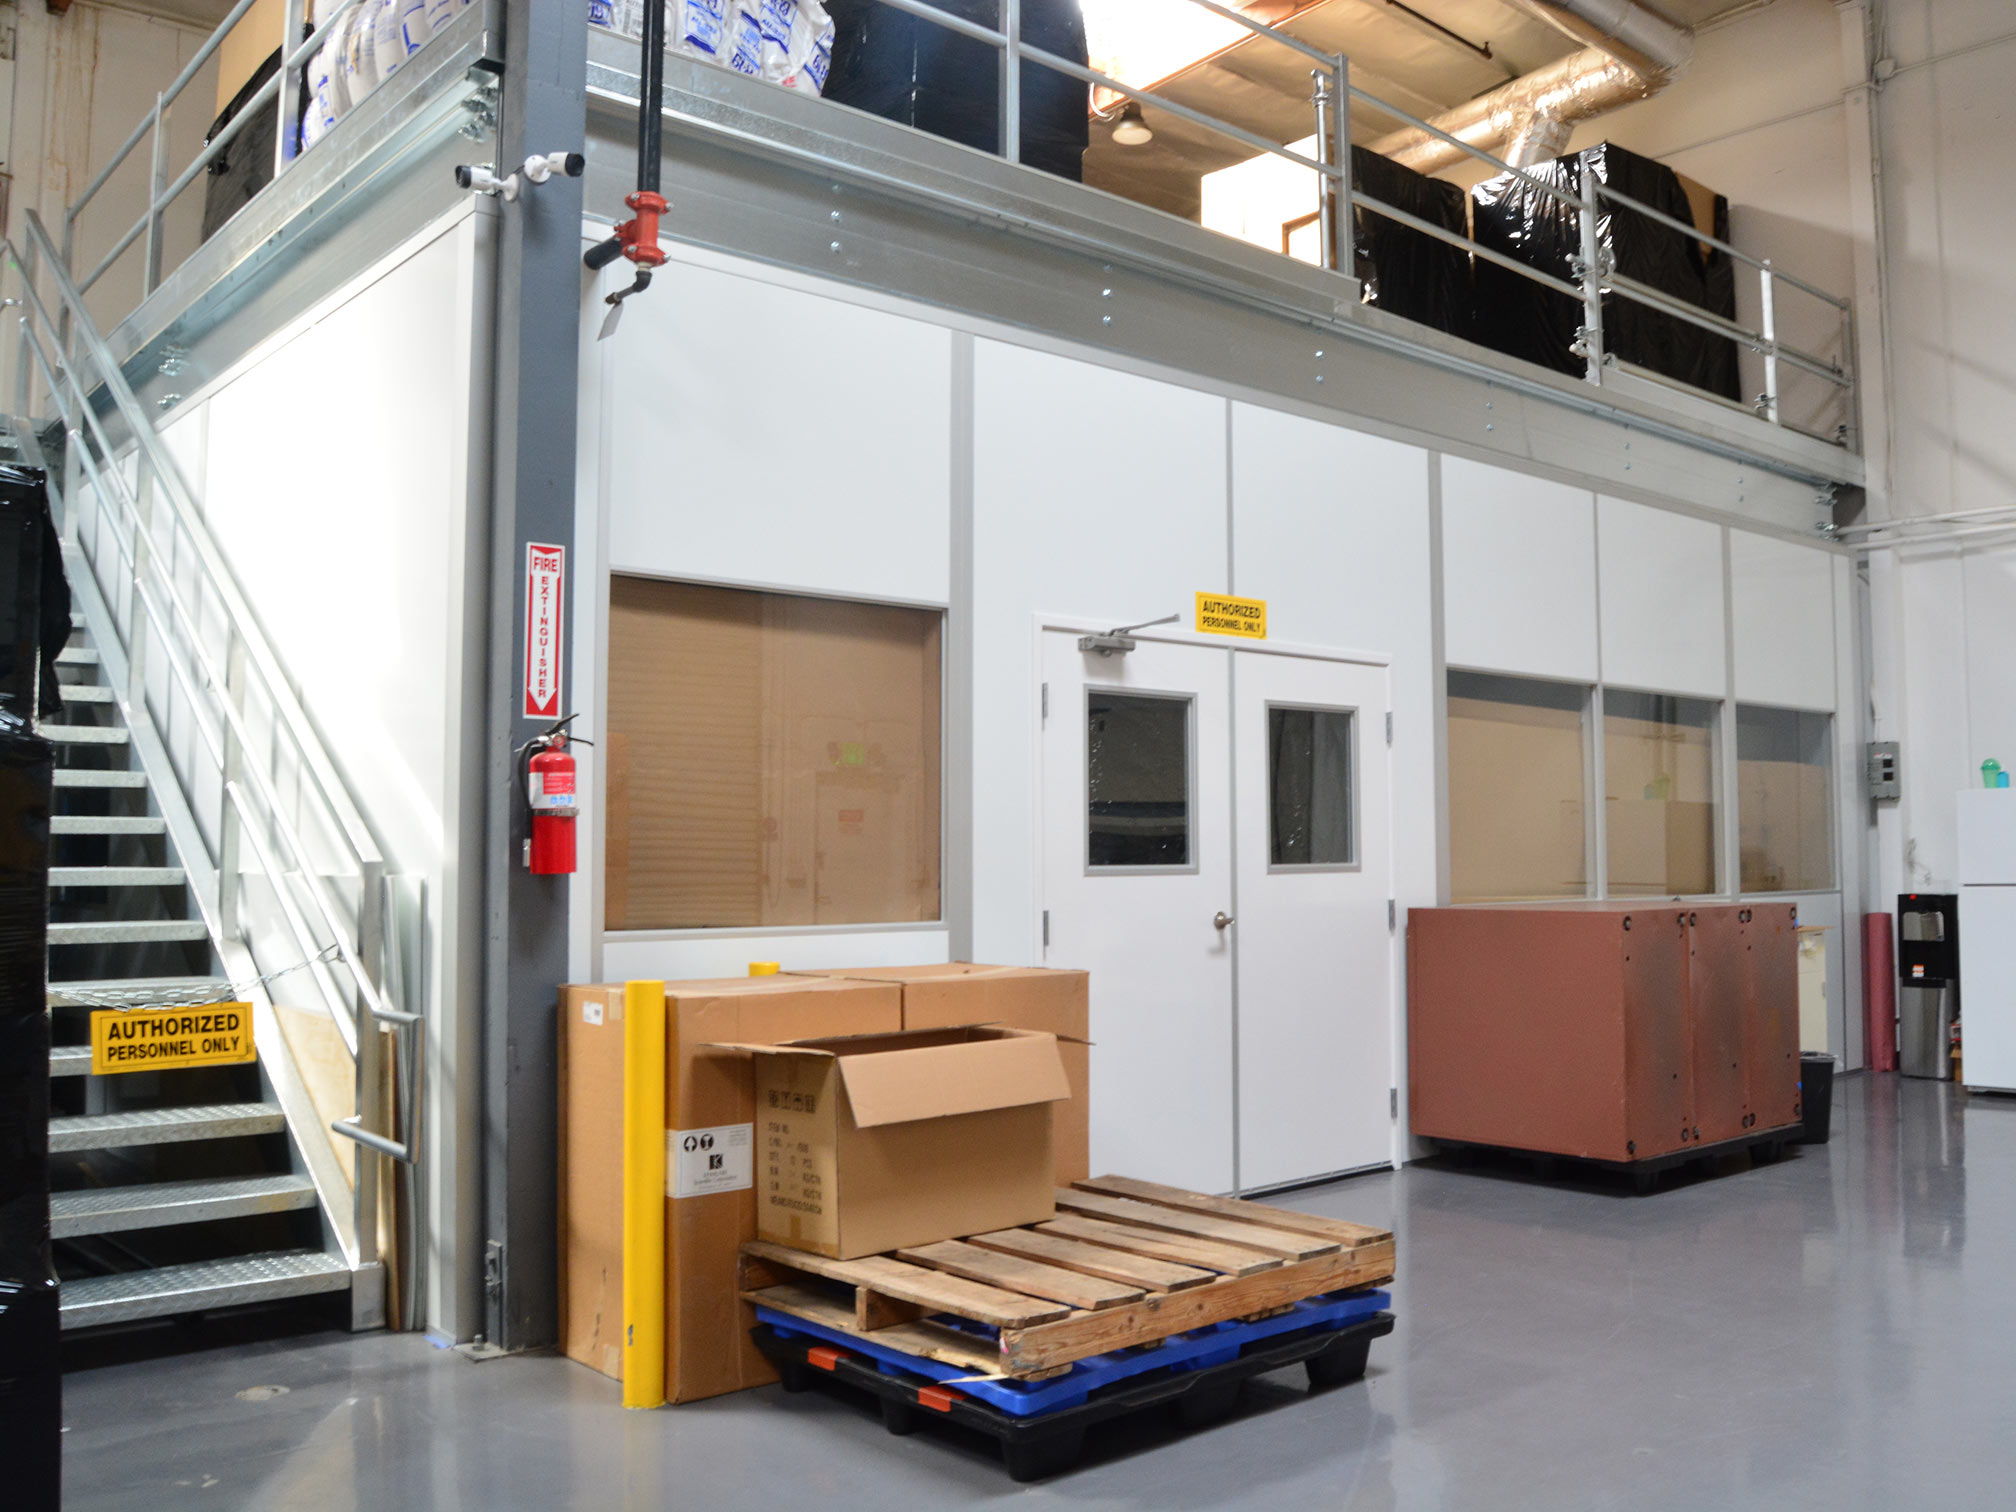 Modular mezzanine structure with storage boxes and equipment on the ground level in an industrial facility.